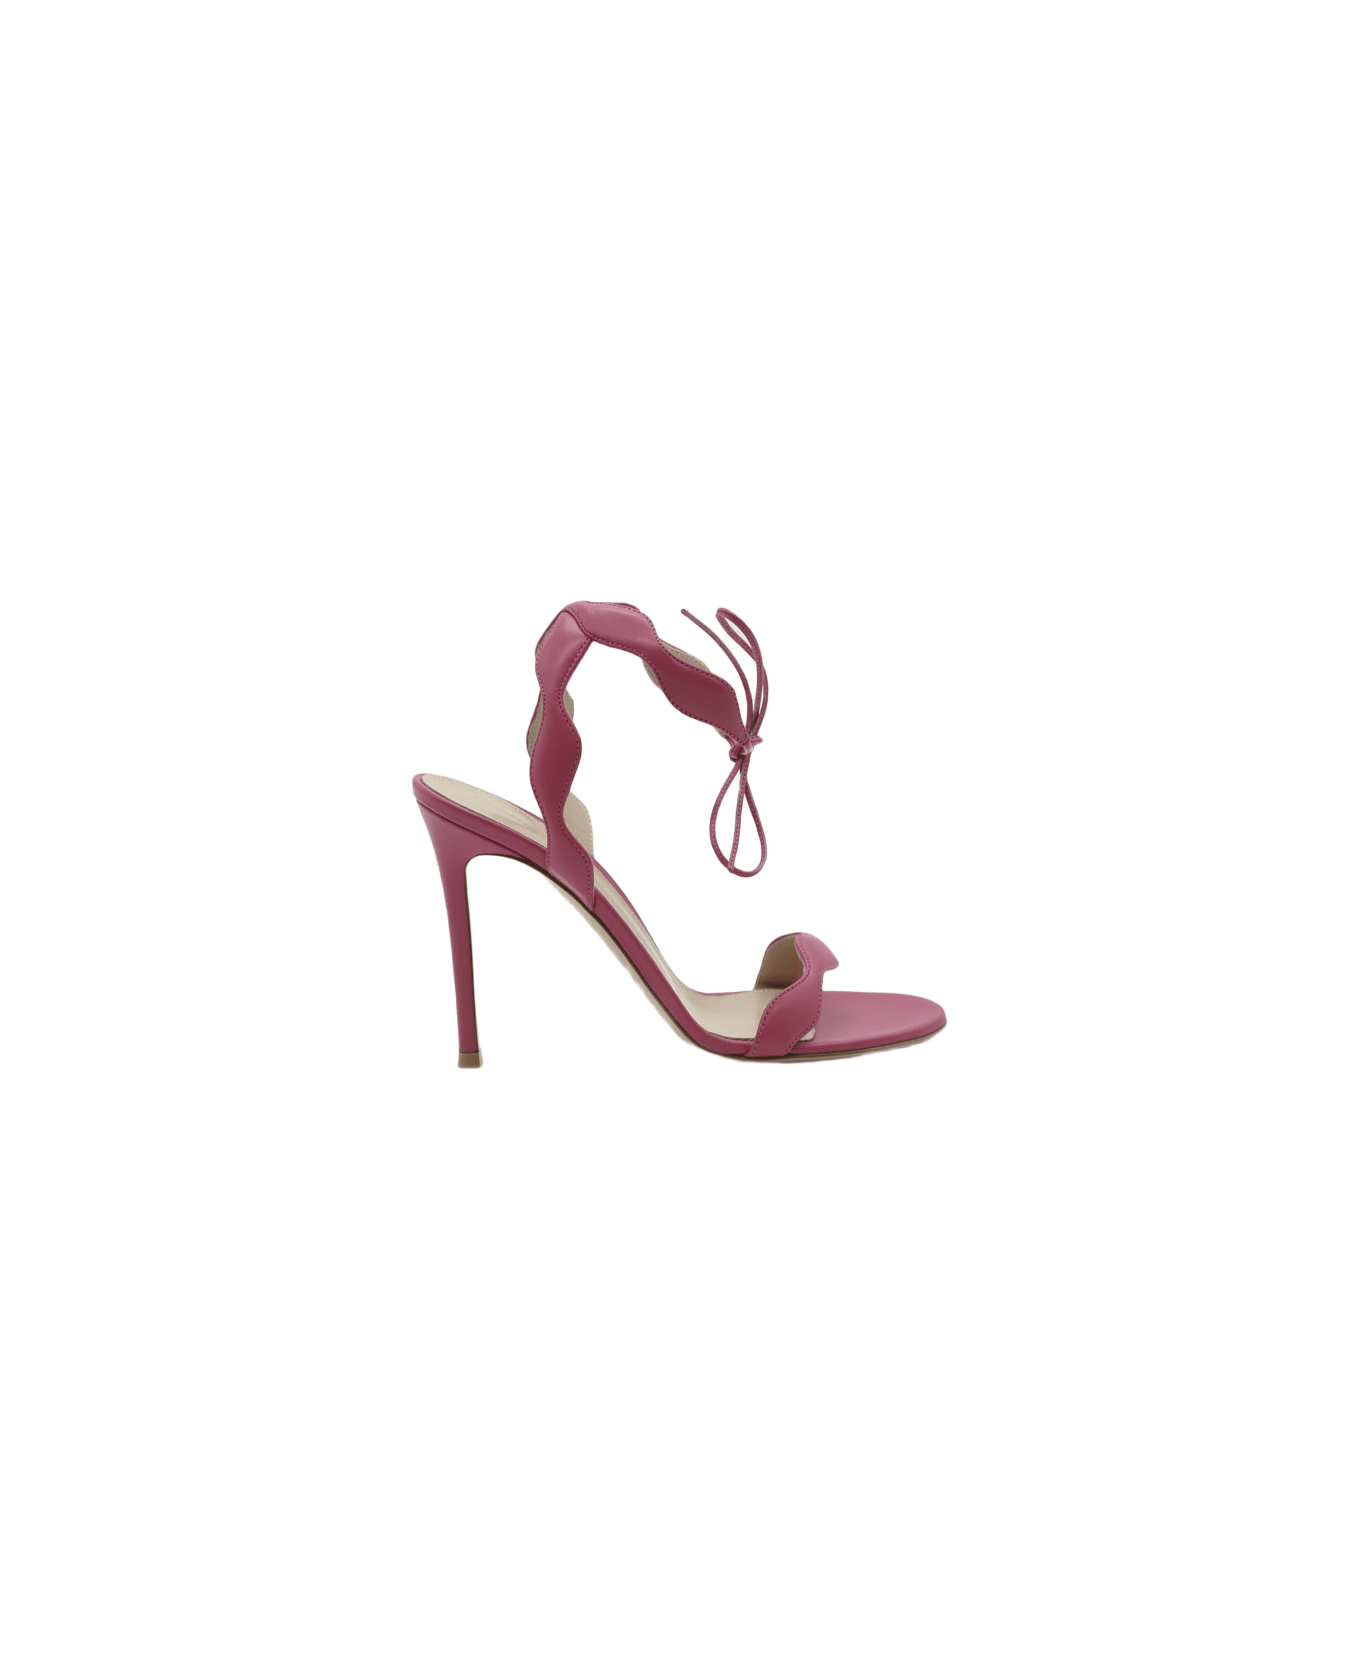 Gianvito Rossi Sandals Made Of Leather - Ruby rose サンダル